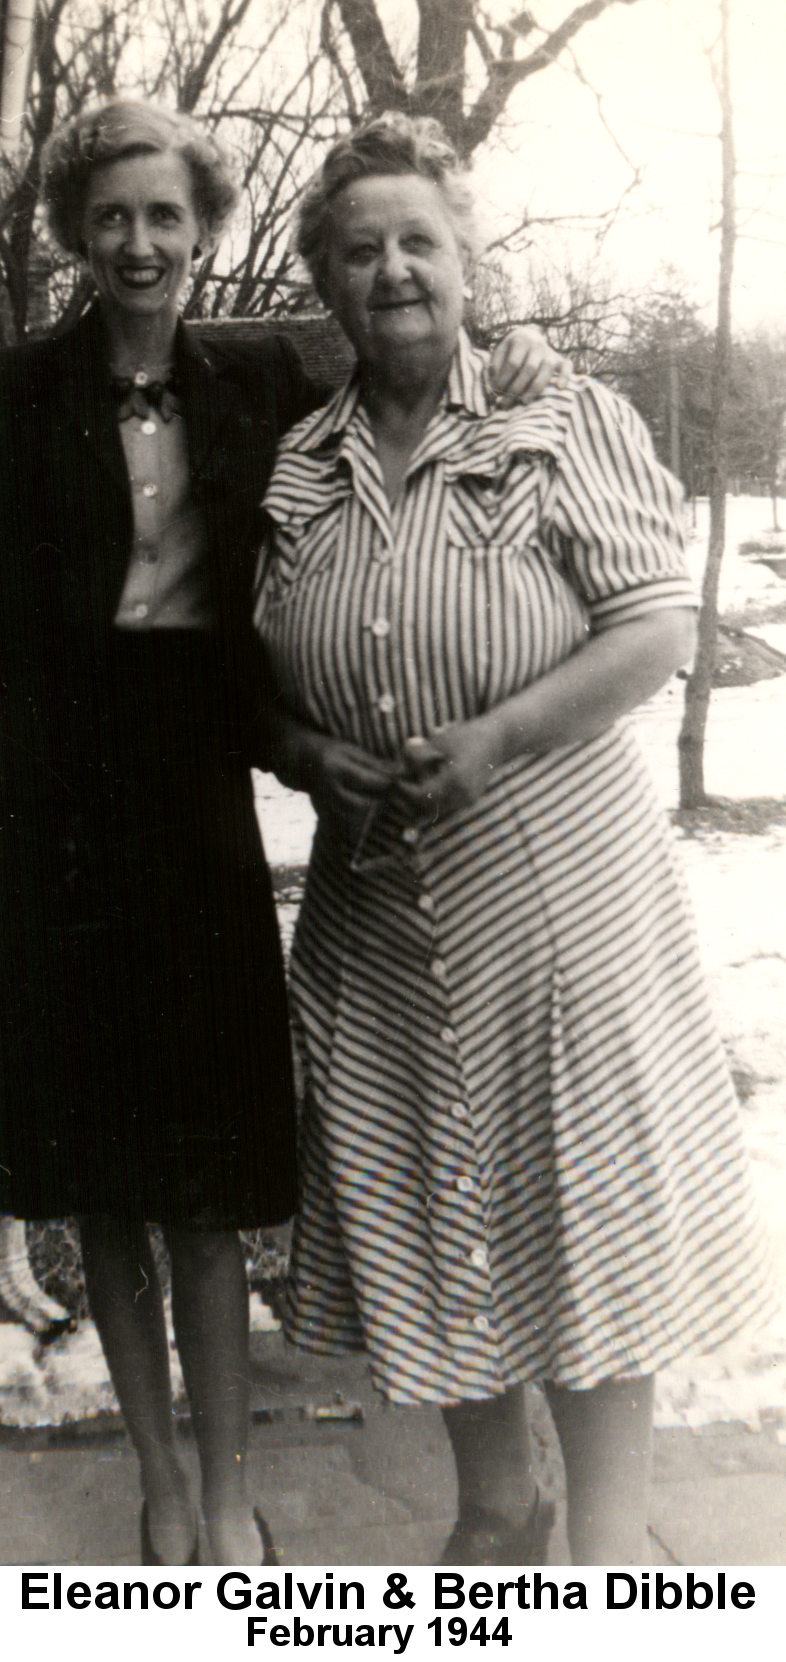 Black and white photo of Eleanor Galvin with short hair parted on the left, wearing a black knee-length skirt and blazer with a lighter-colored blouse standing with her left arm around the shoulders of Bertha Dibble, with curly grey hair and wearing a pin-striped calf-length dress, on a snow-covered winter day in front of bare trees.